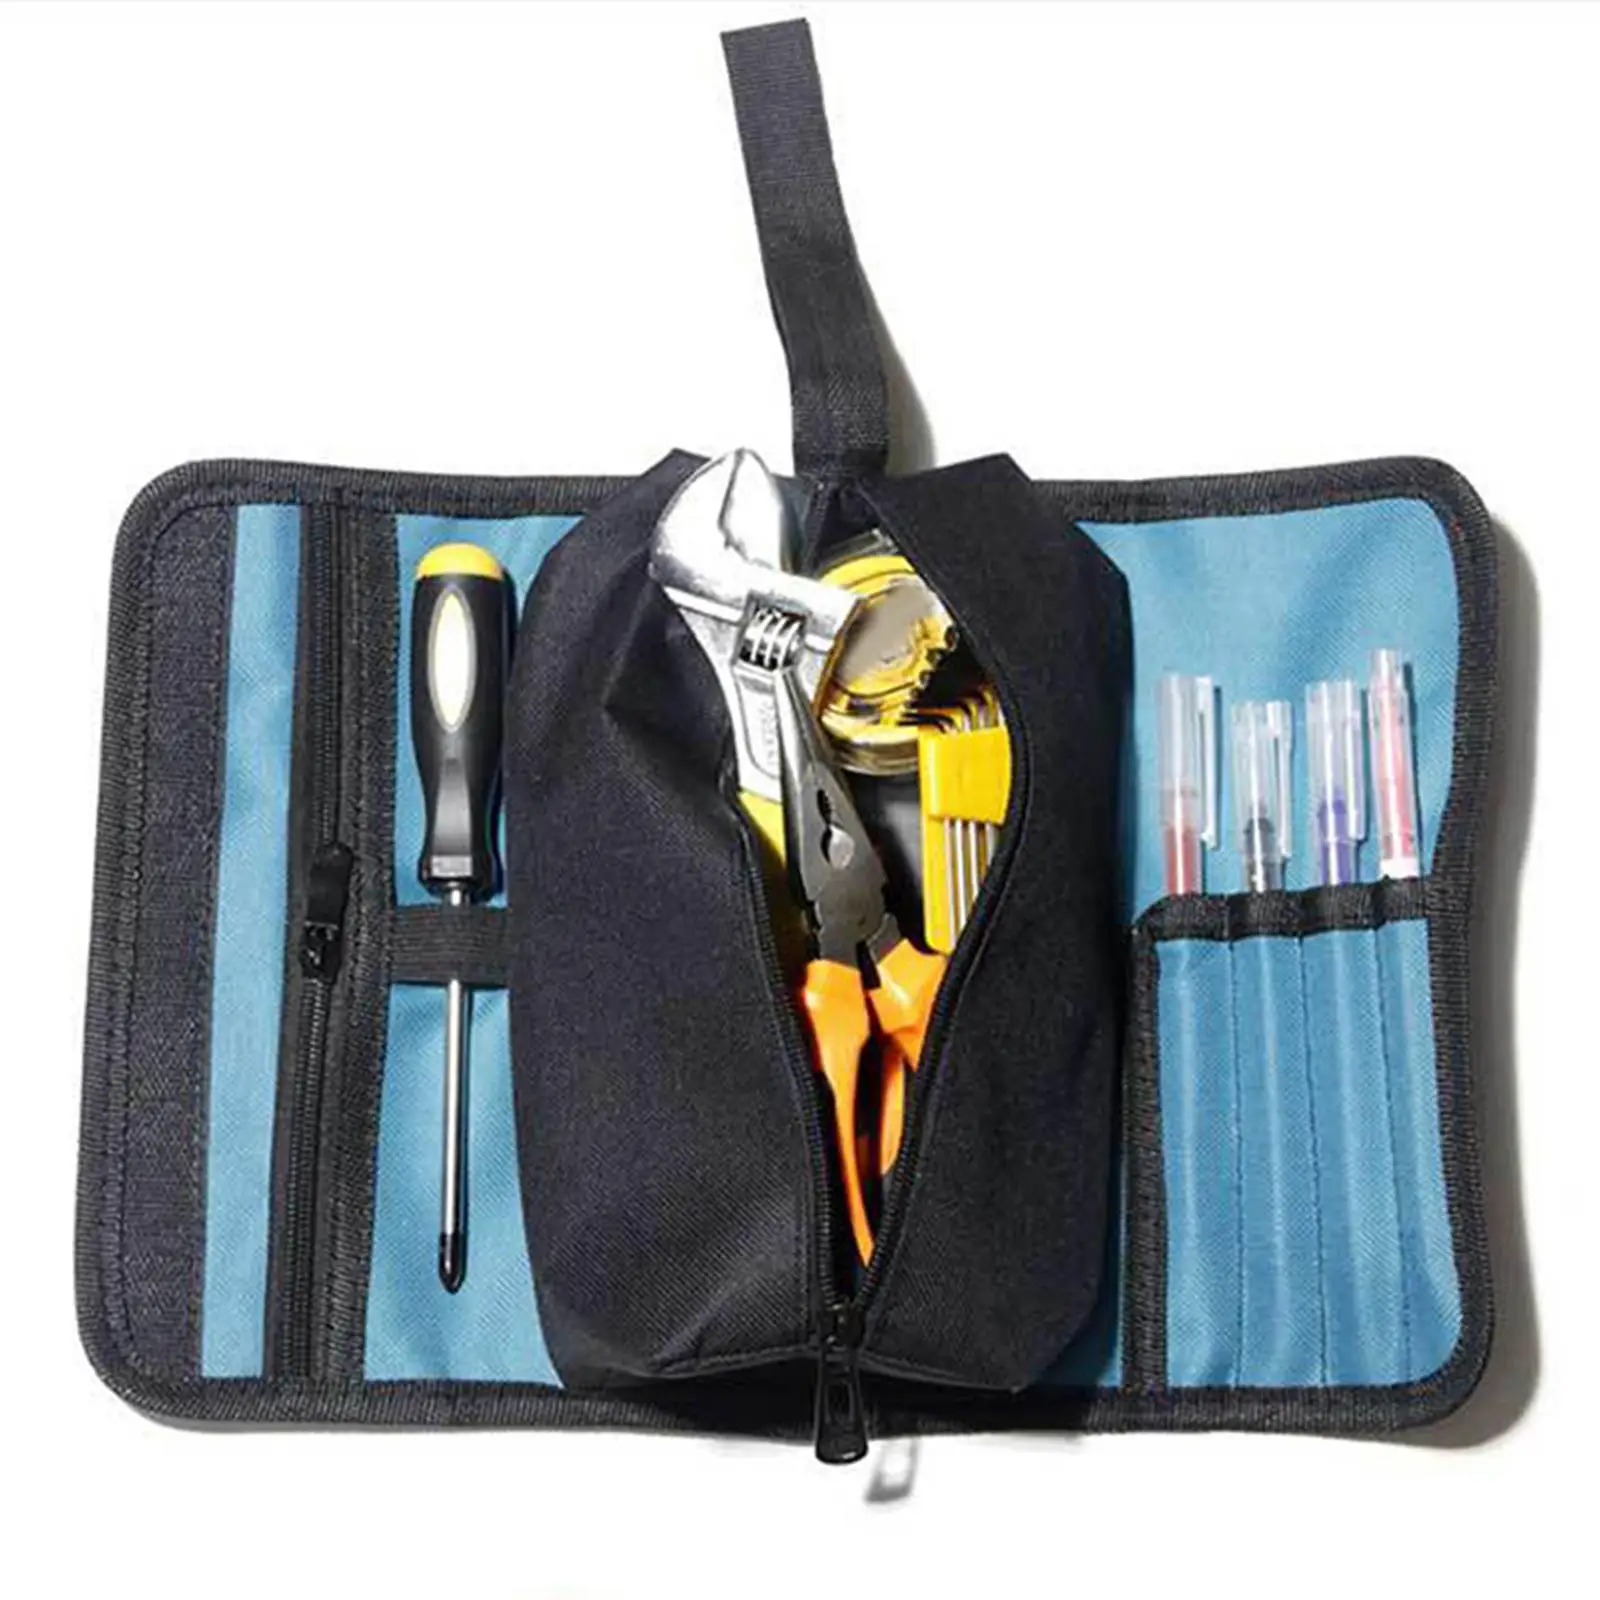 Compact Tool Storage Bag Case Organizer Electrician Accessory Portable Heavy Duty Tool Pouch Tool Bag for Plier Screwdriver Men